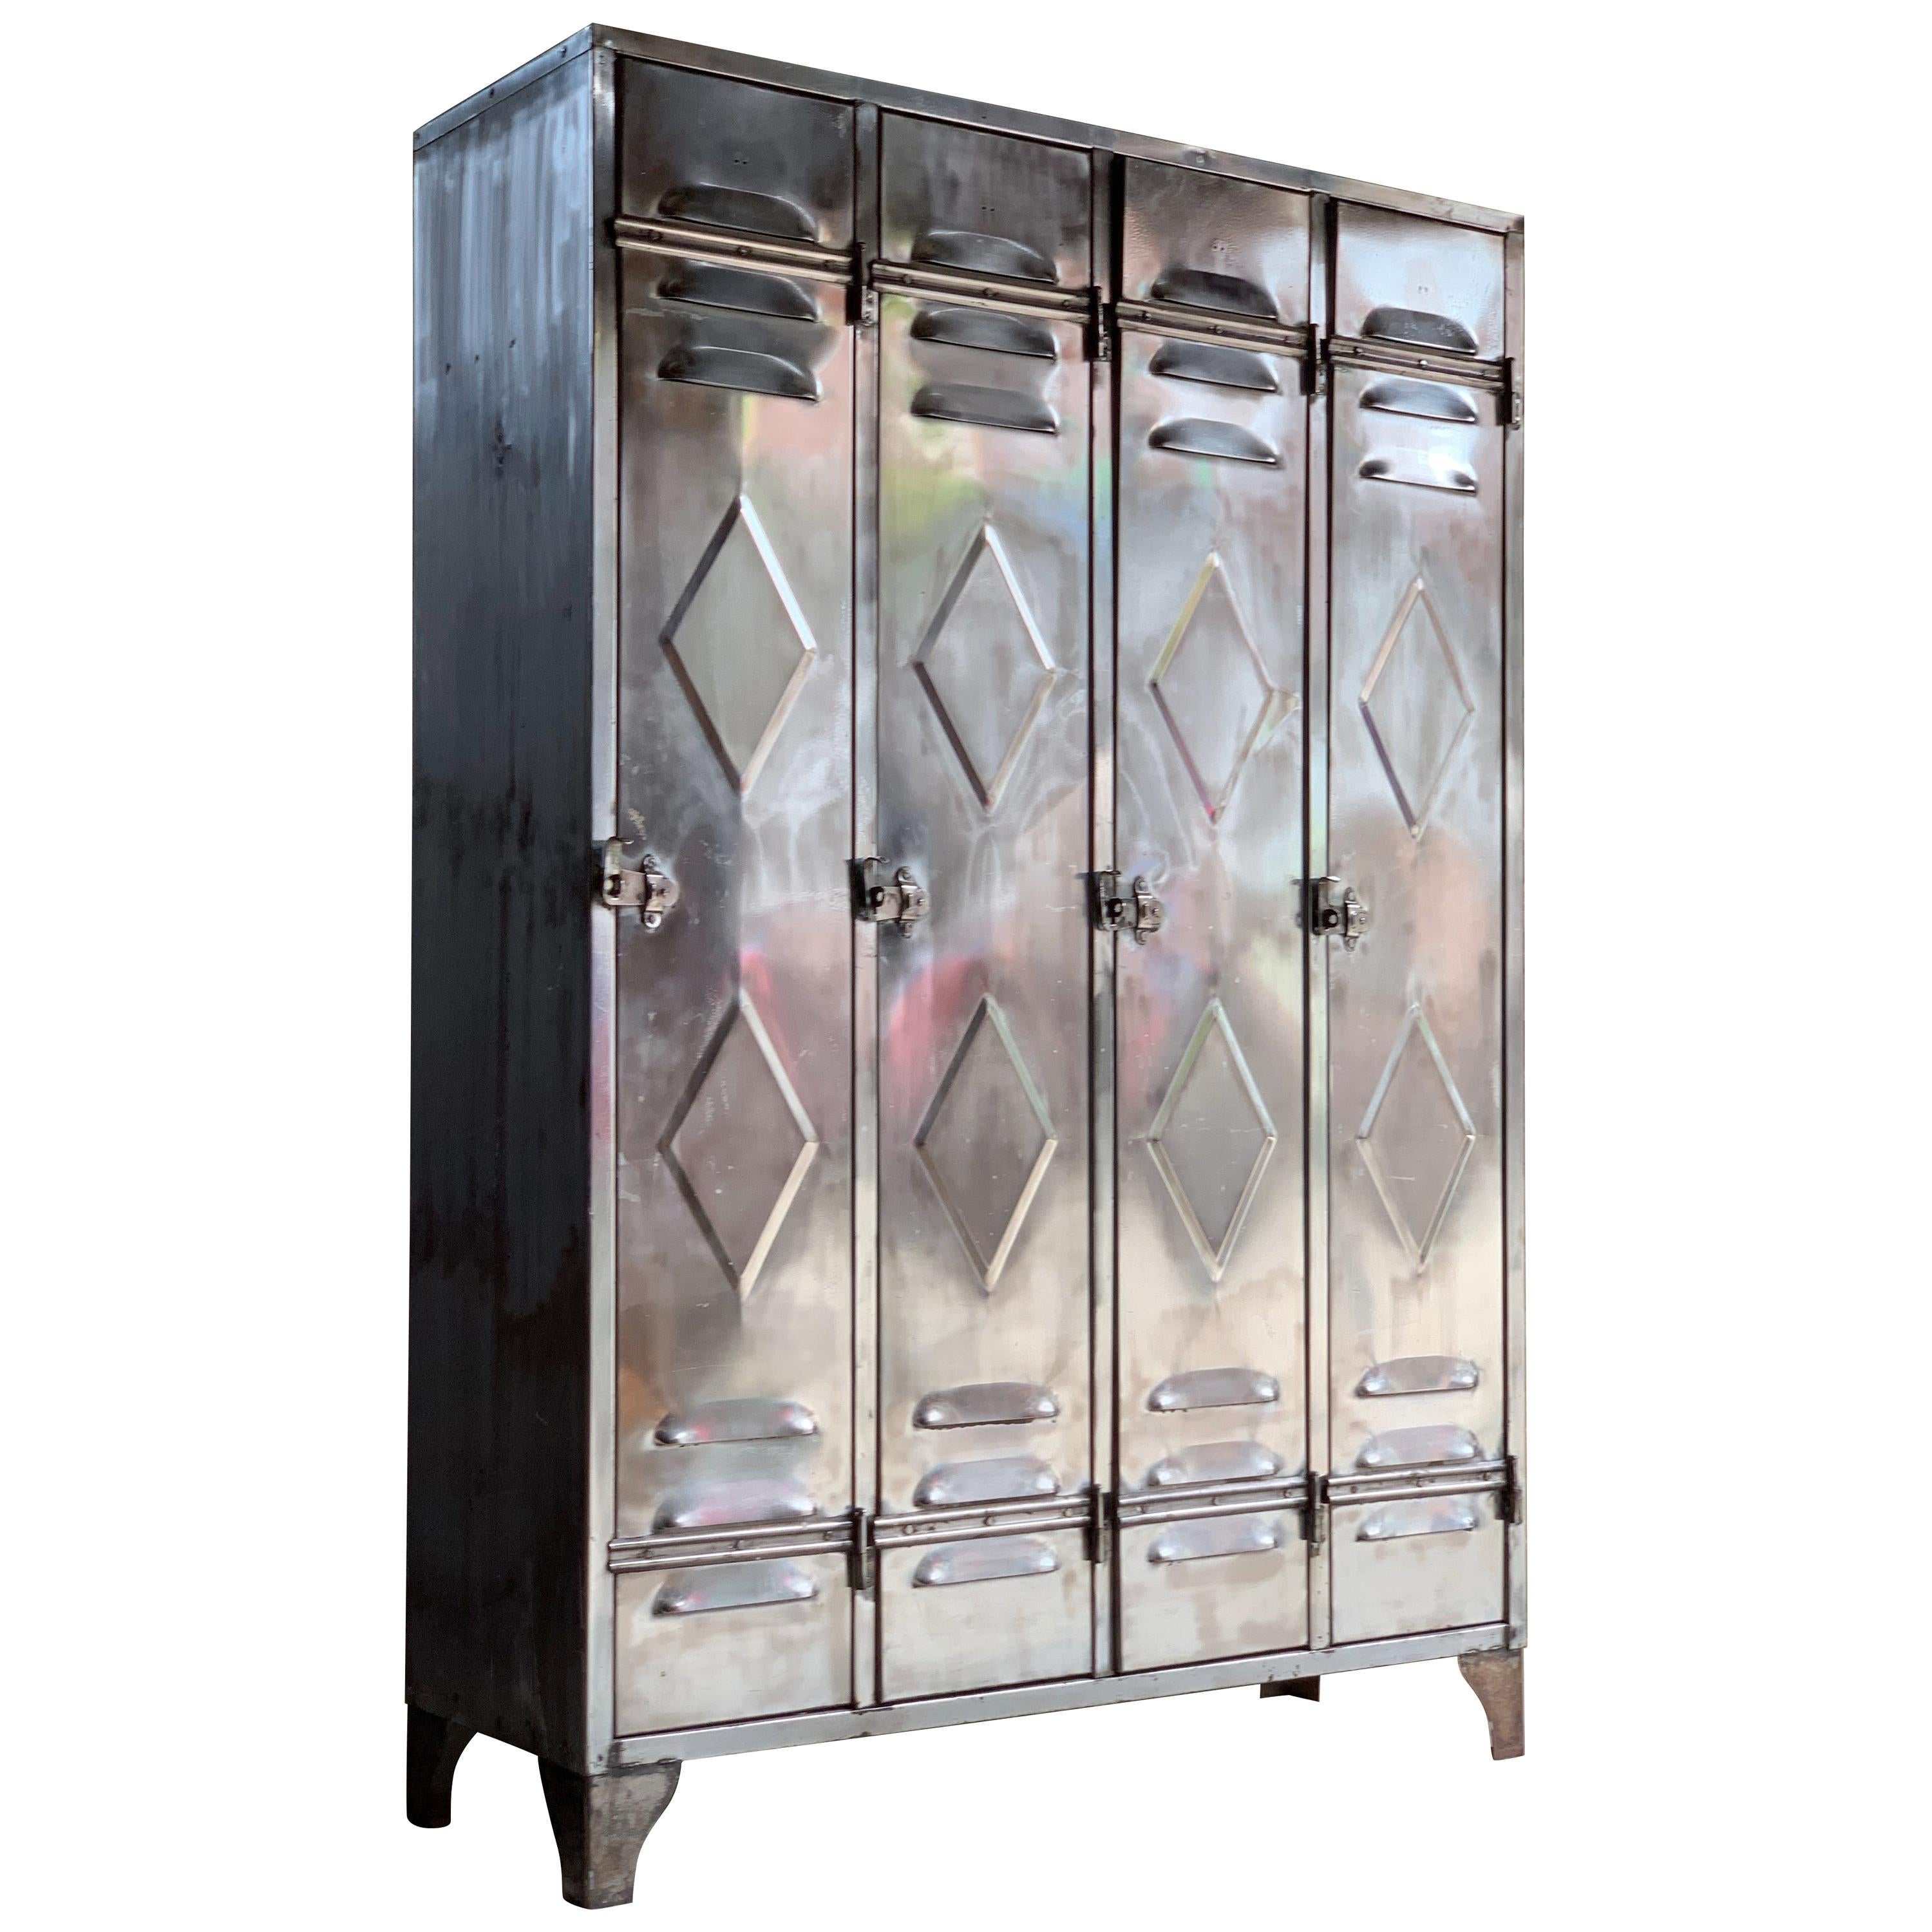 Magnificent mid-20th century industrial polished steel school lockers cabinets circa 1940, with four long double diamond embossed doors with upper and lower vents, each with shelf and two hanging hooks raised on shaped bracket supports, each door